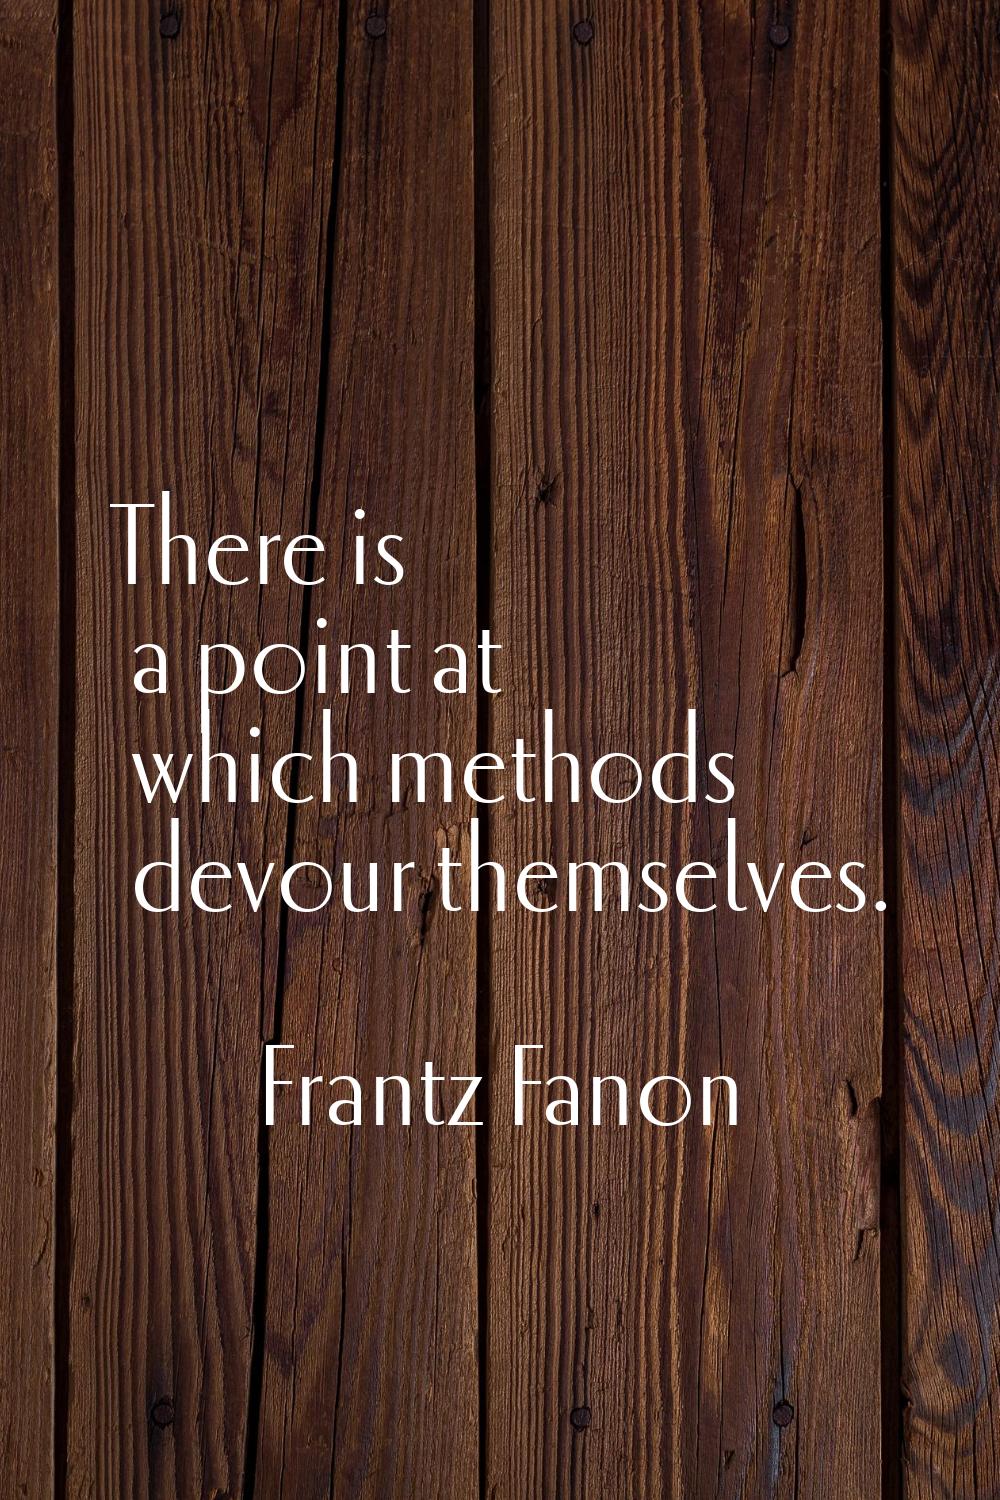 There is a point at which methods devour themselves.